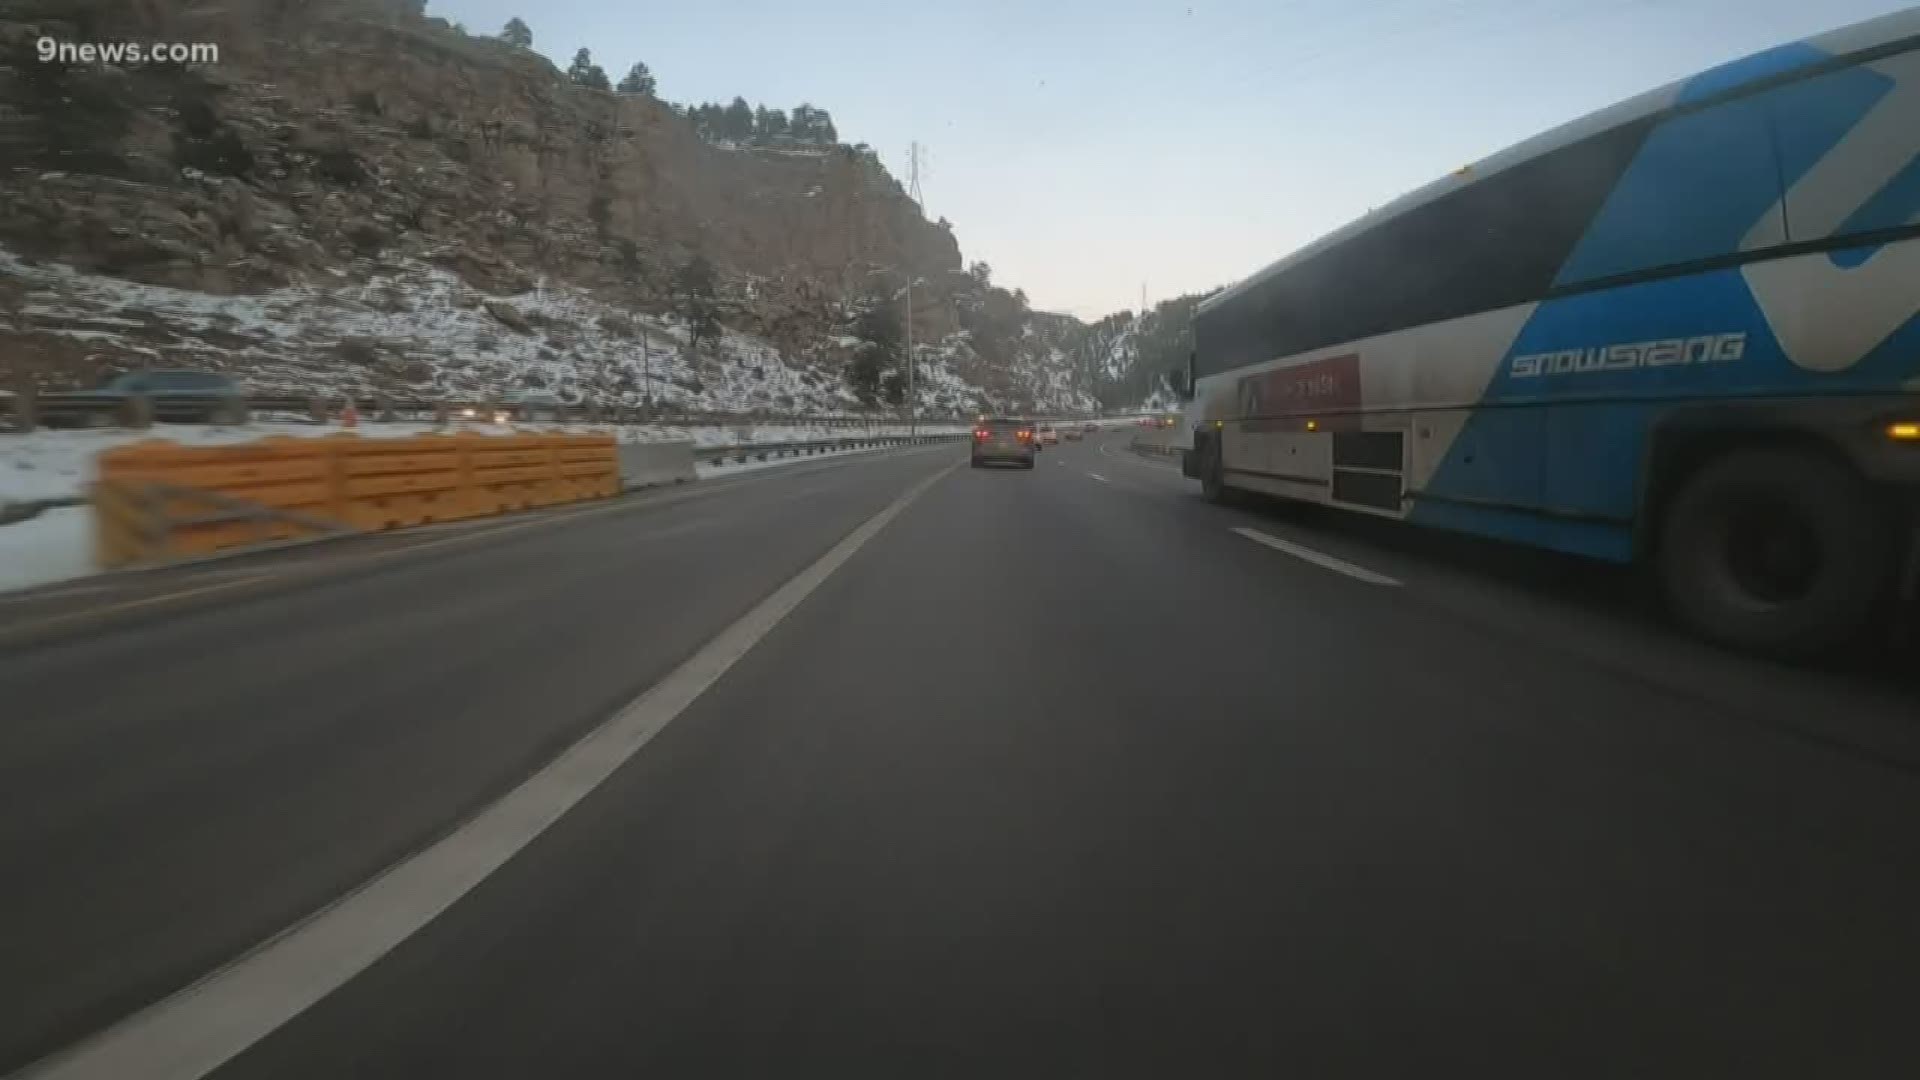 The Snowstang bus has been running nearly half empty, but CDOT says it takes time to increase ridership.